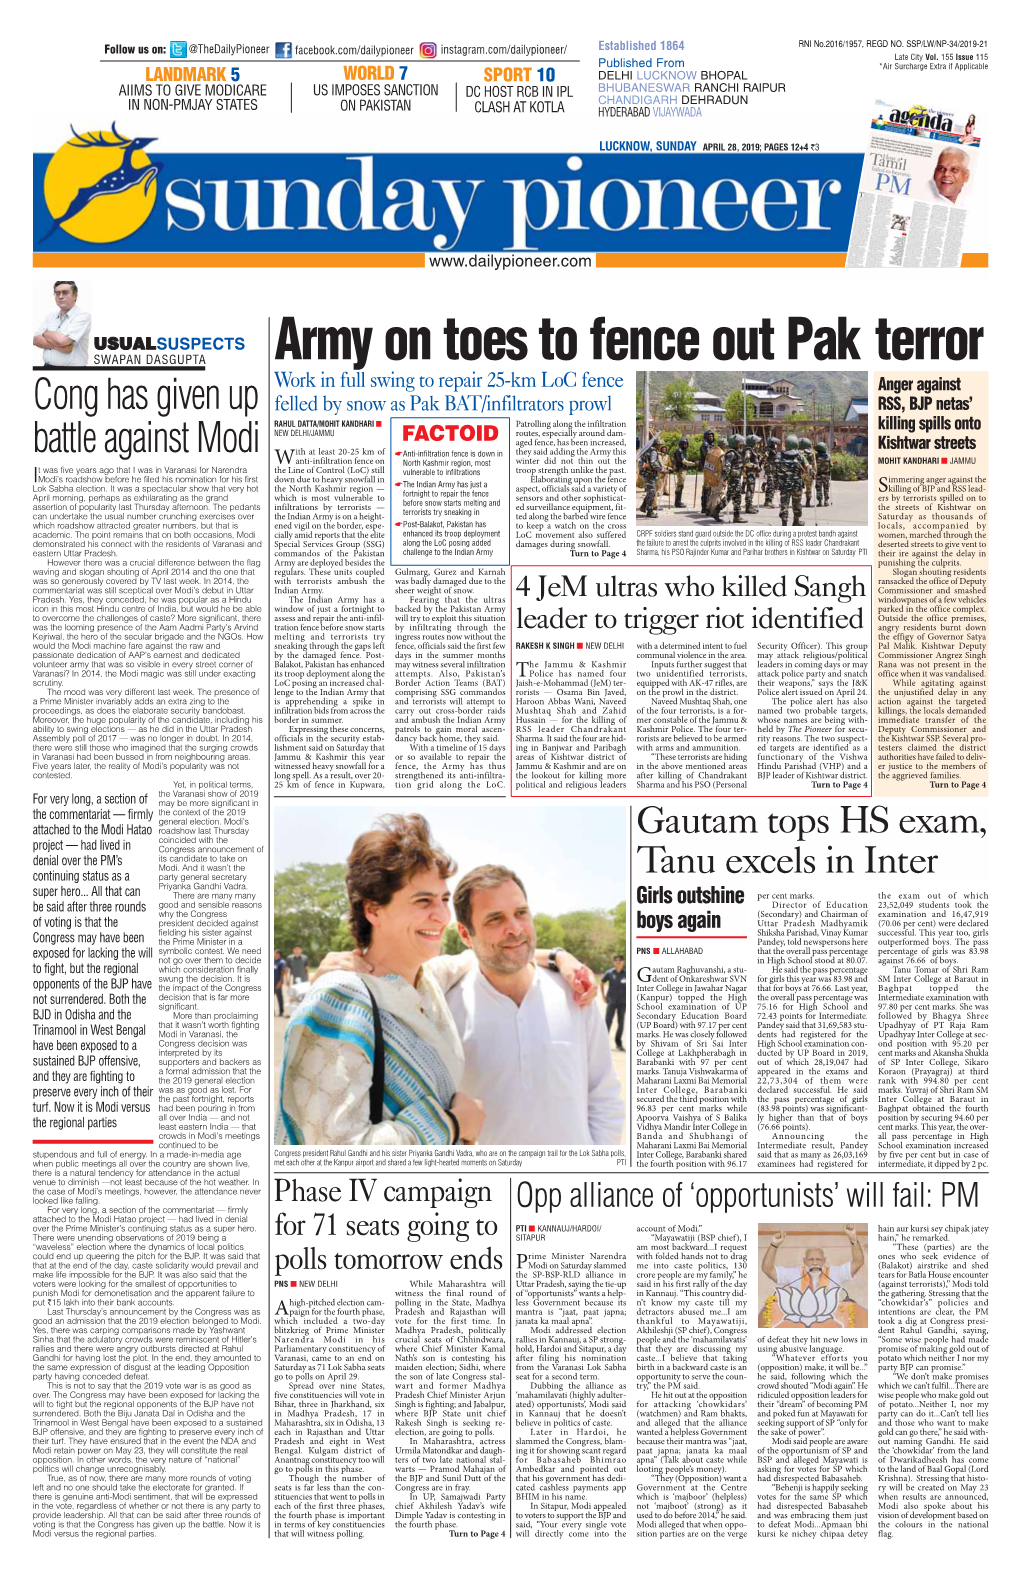 Army on Toes to Fence out Pak Terror